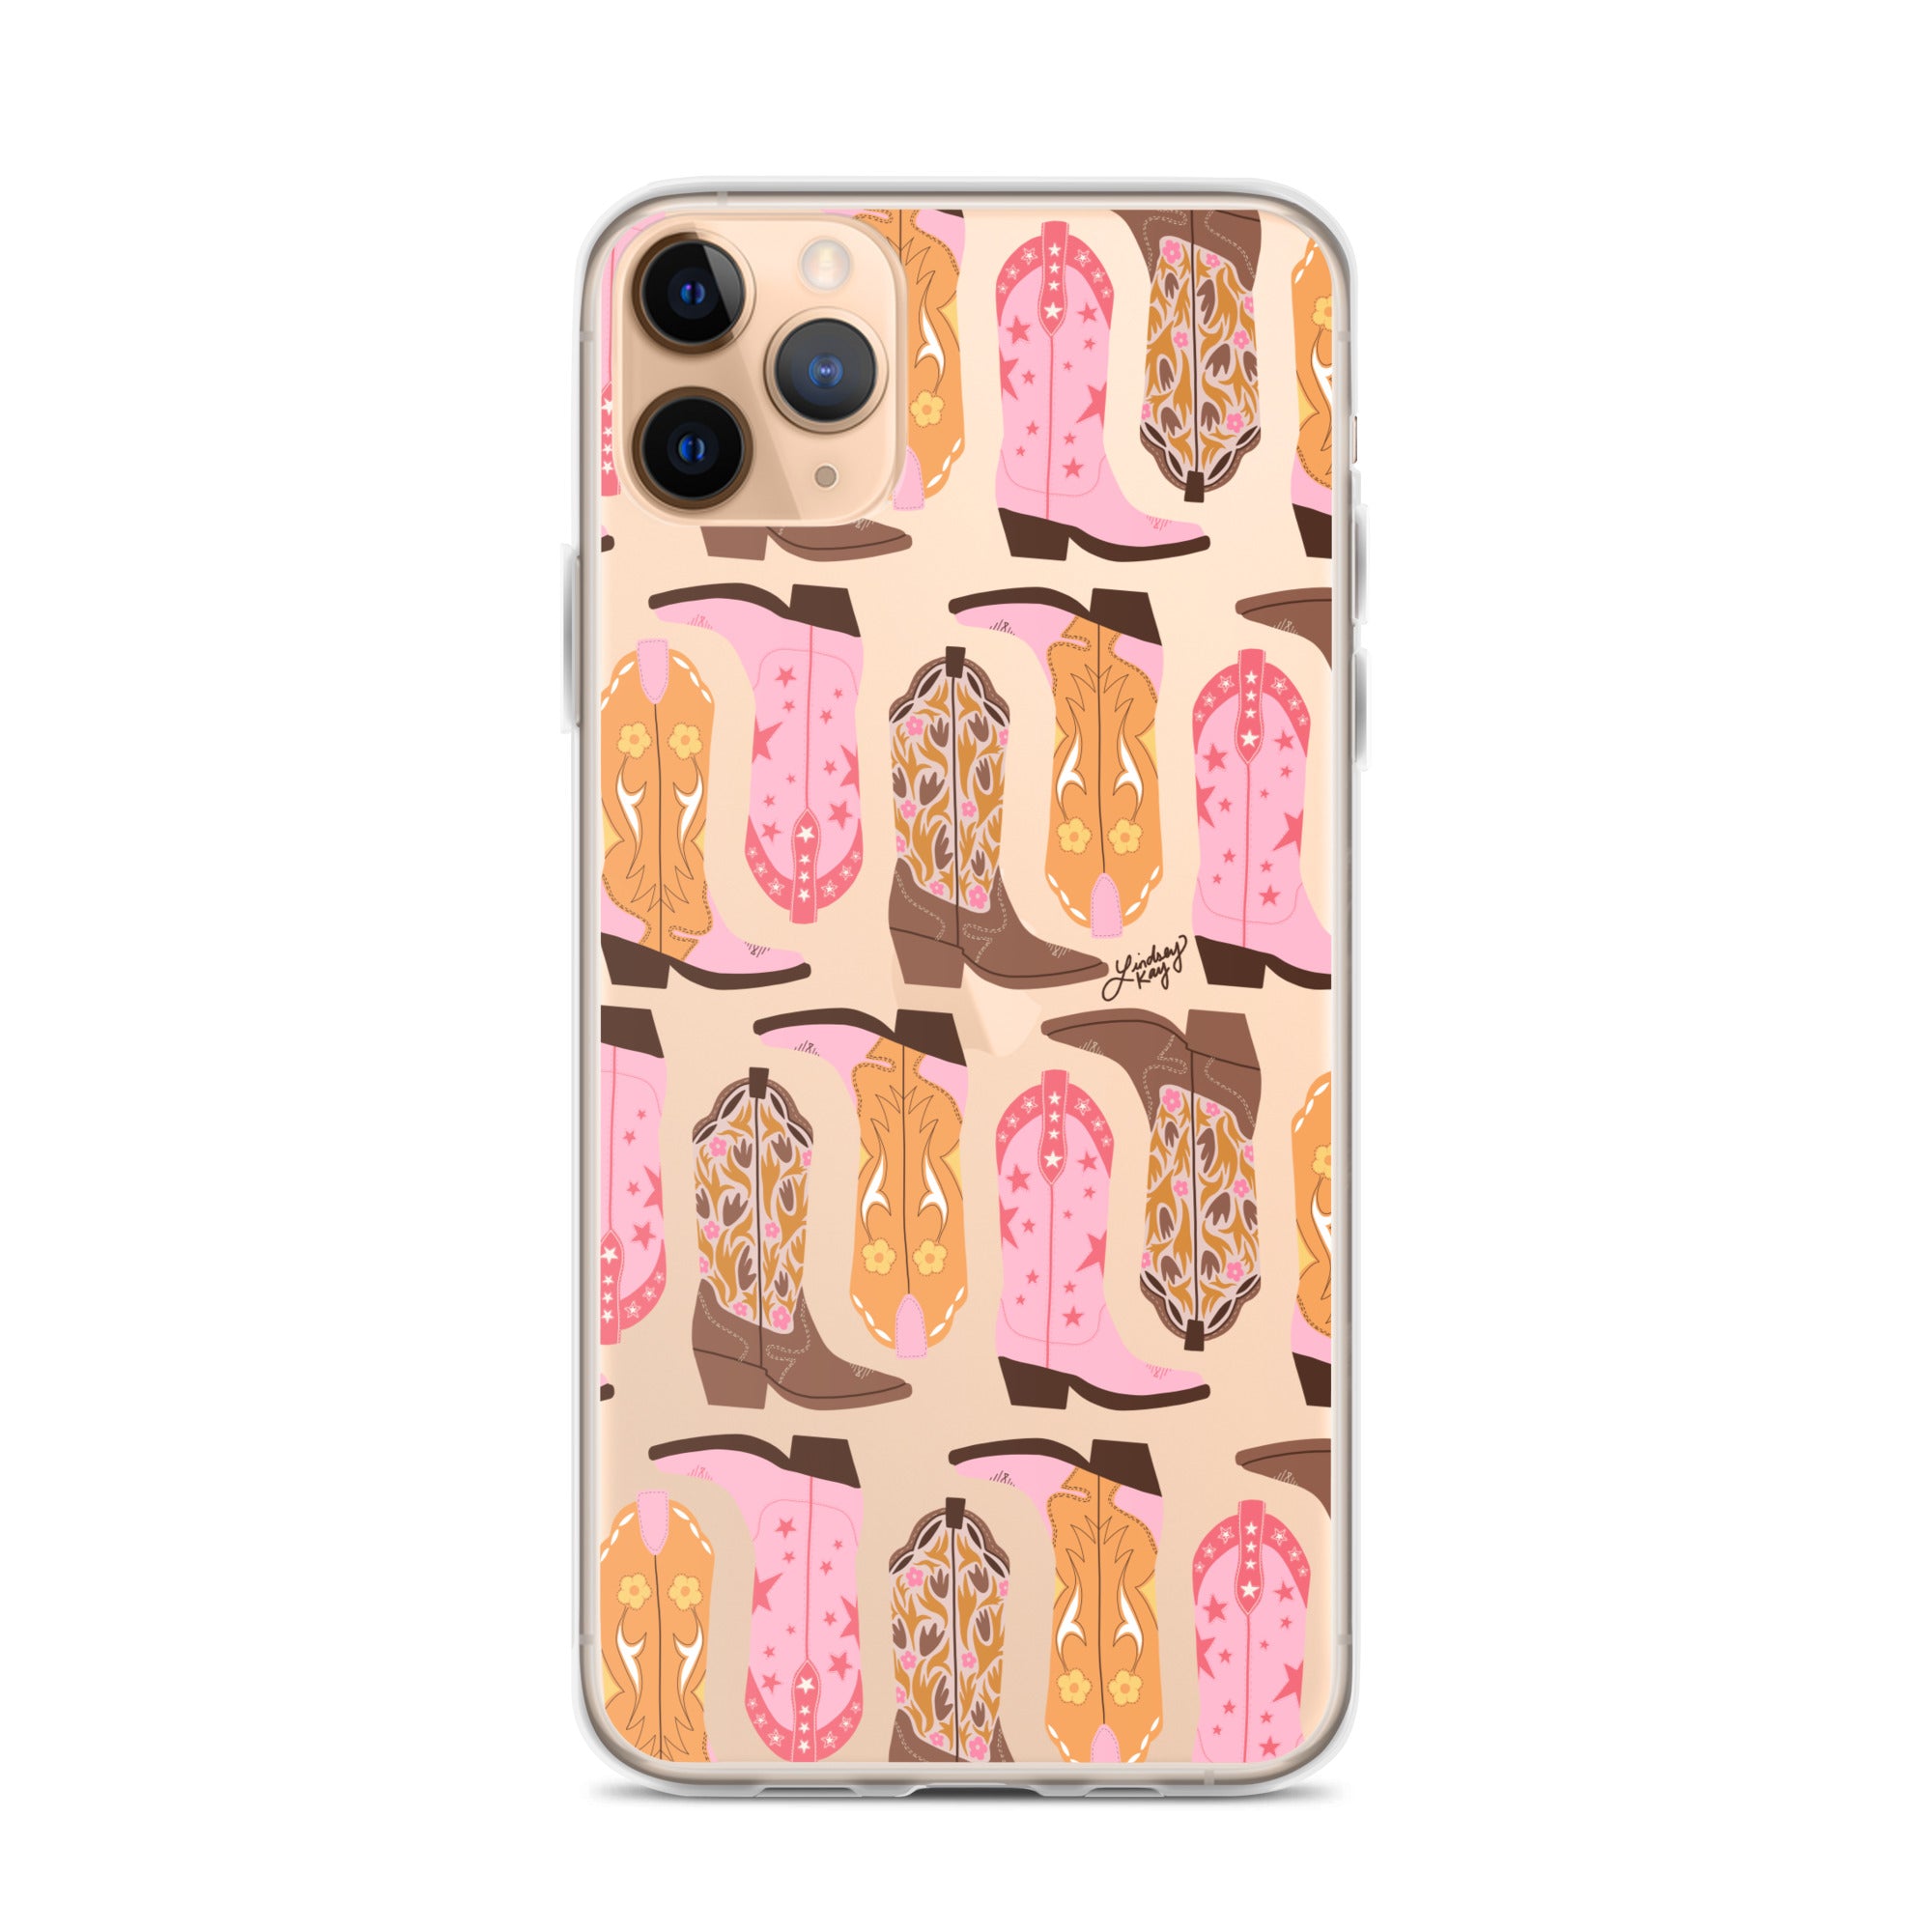 cowboy cowgirl boots pattern illustration pink orange brown iphone case protector phone cover clear mobile accessories lindsey kay collective trendy cute western country texas